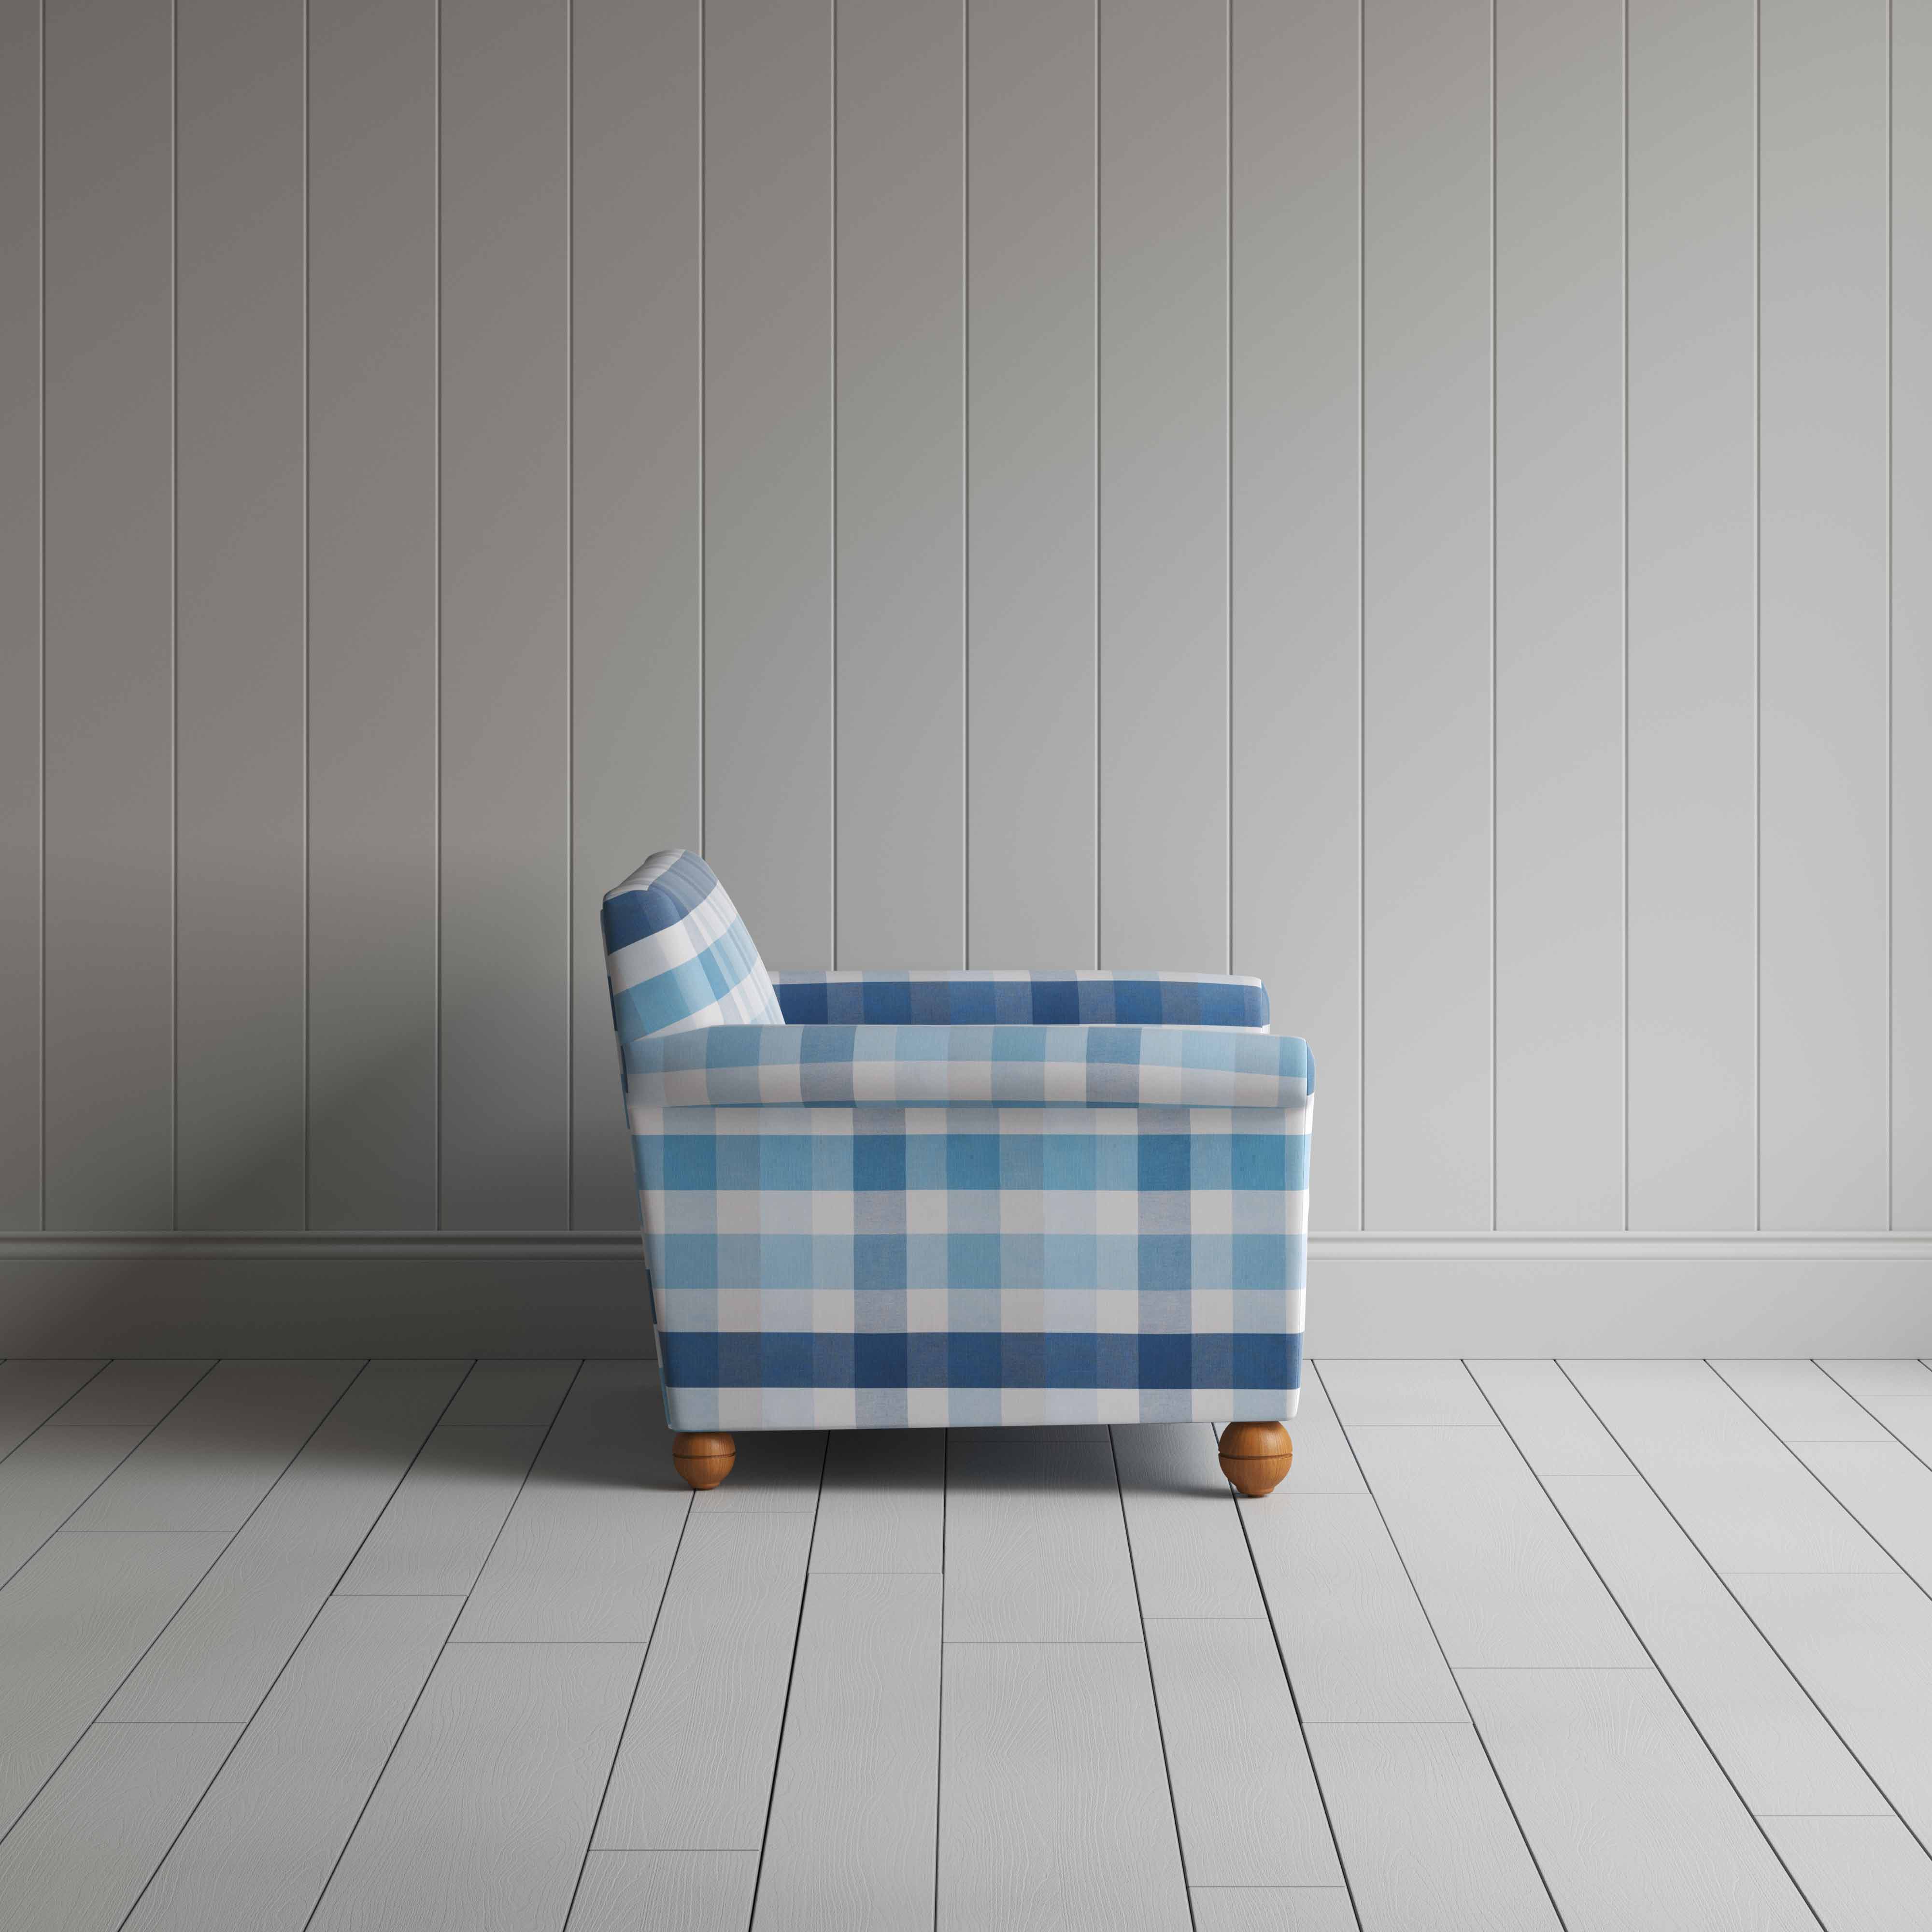  Idler Love Seat in Checkmate Cotton, Blue 